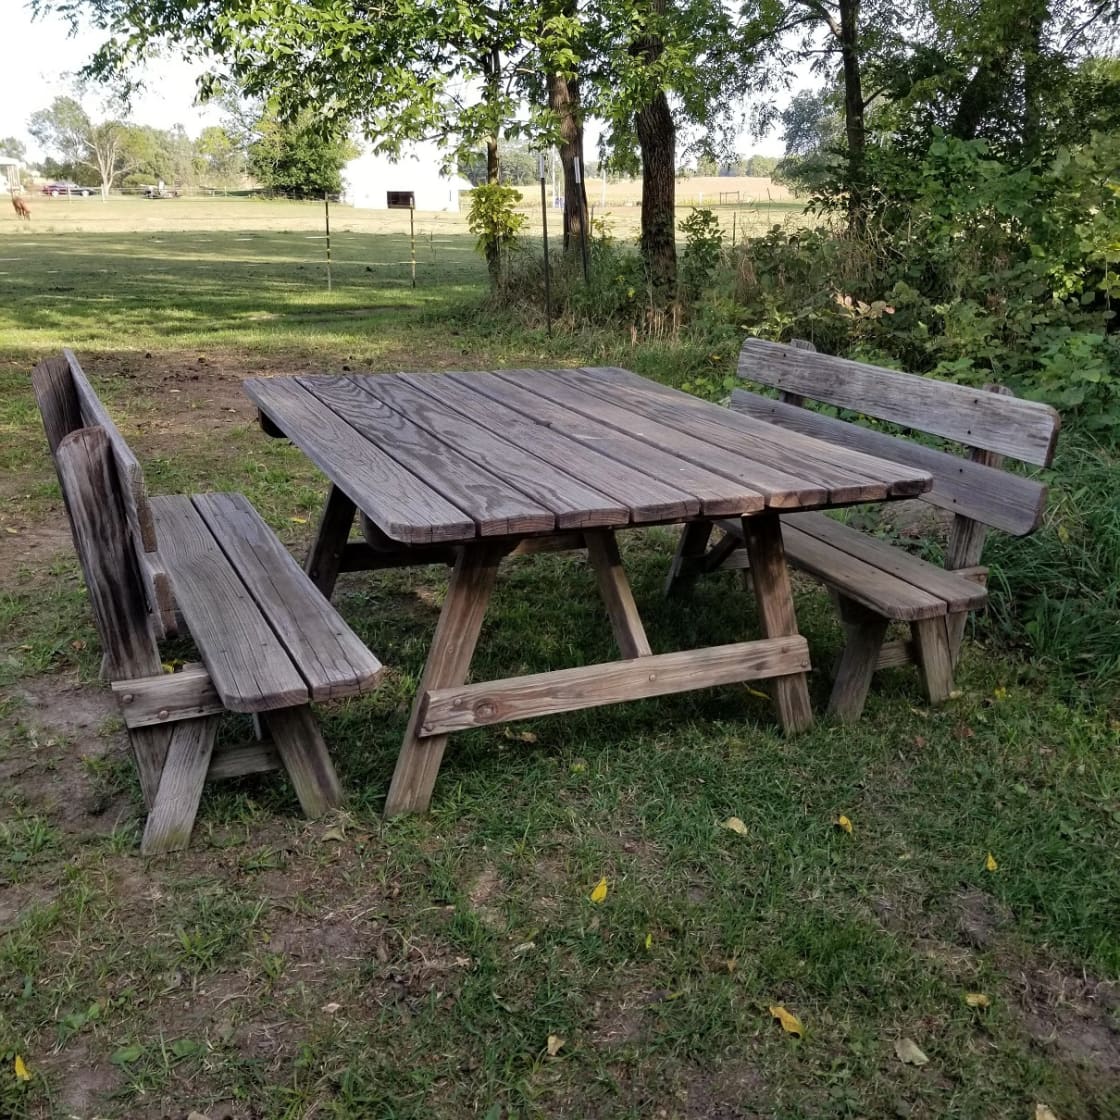 Recently added picnic table.